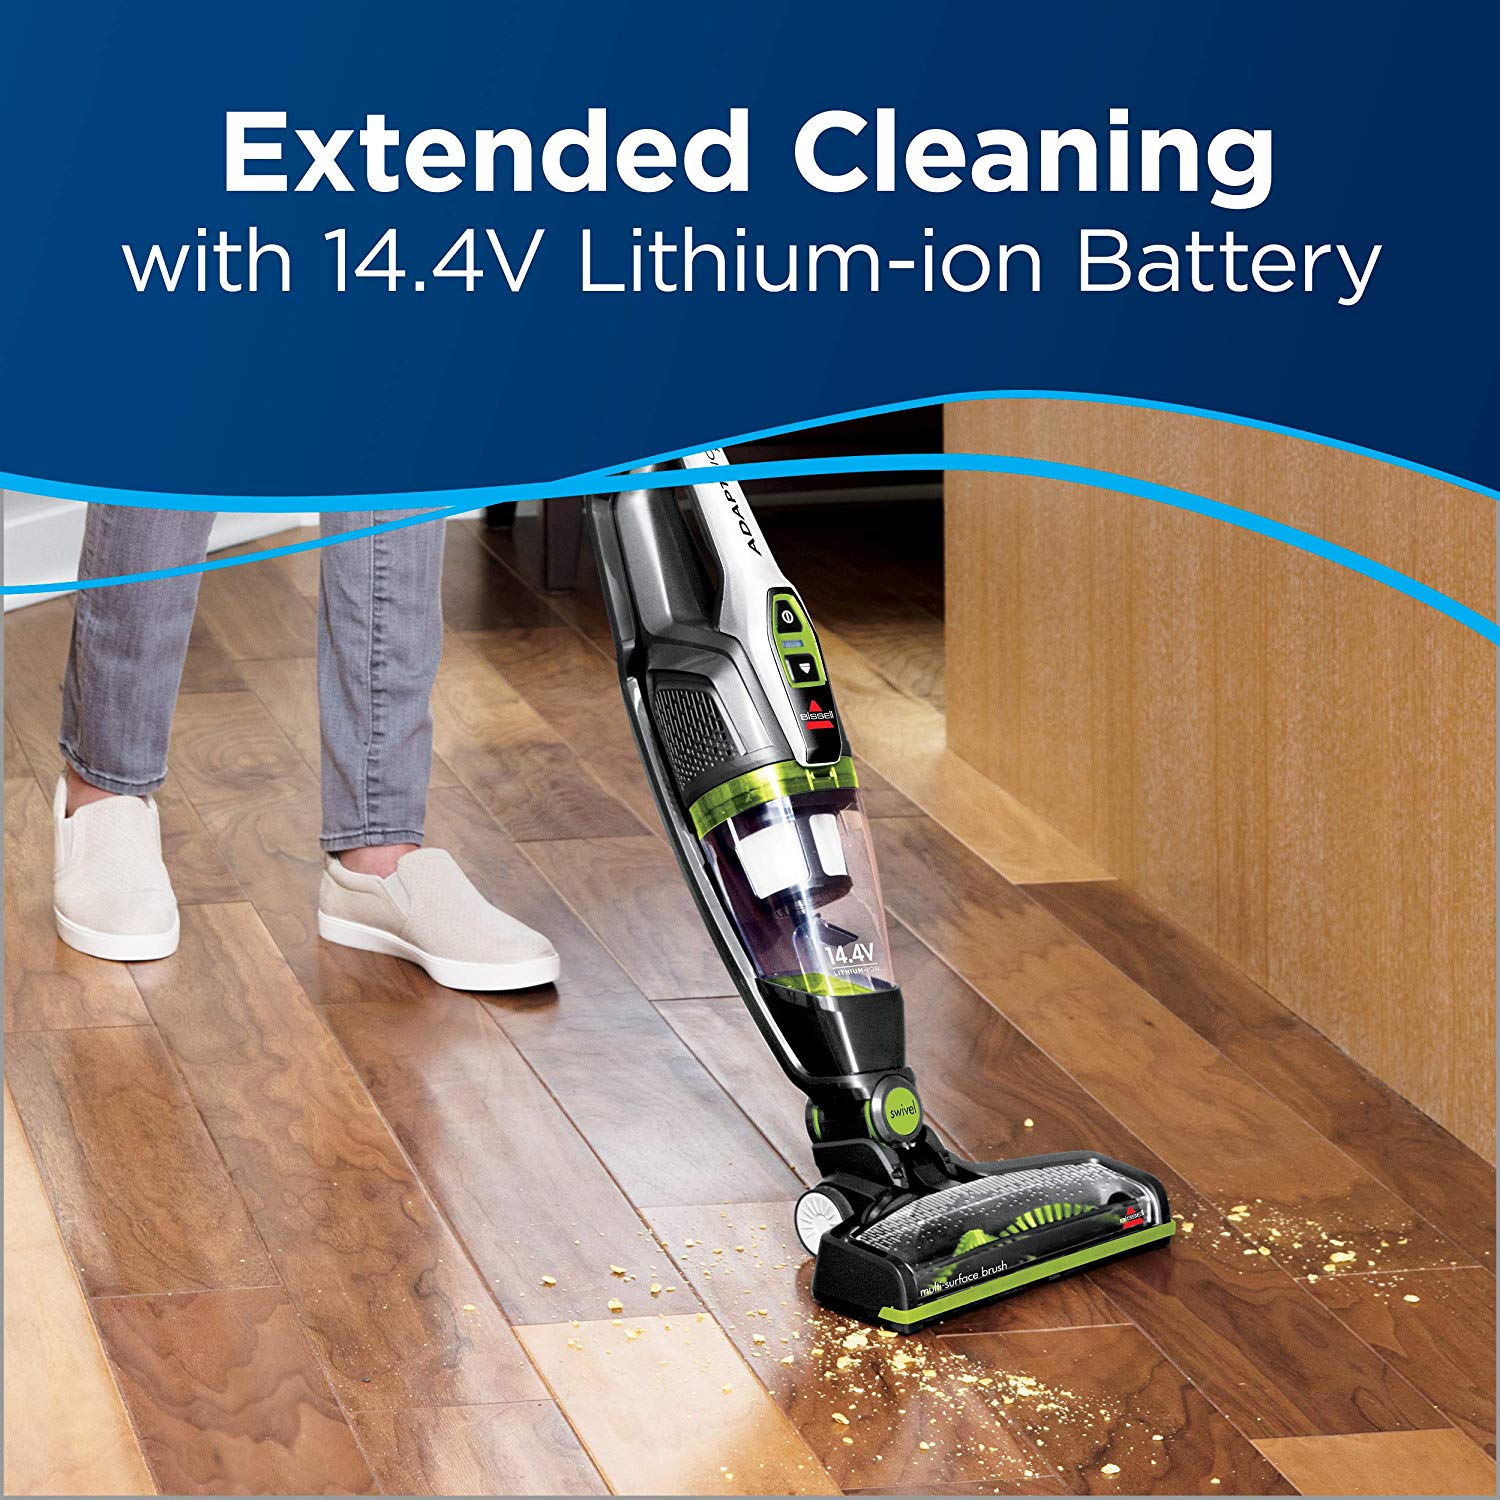 Bissell 2387 Adapt XRT Pet 14.4V Lithium Ion Cordless Stick Vacuum Cleaner, Green, 2387 - image 2 of 7